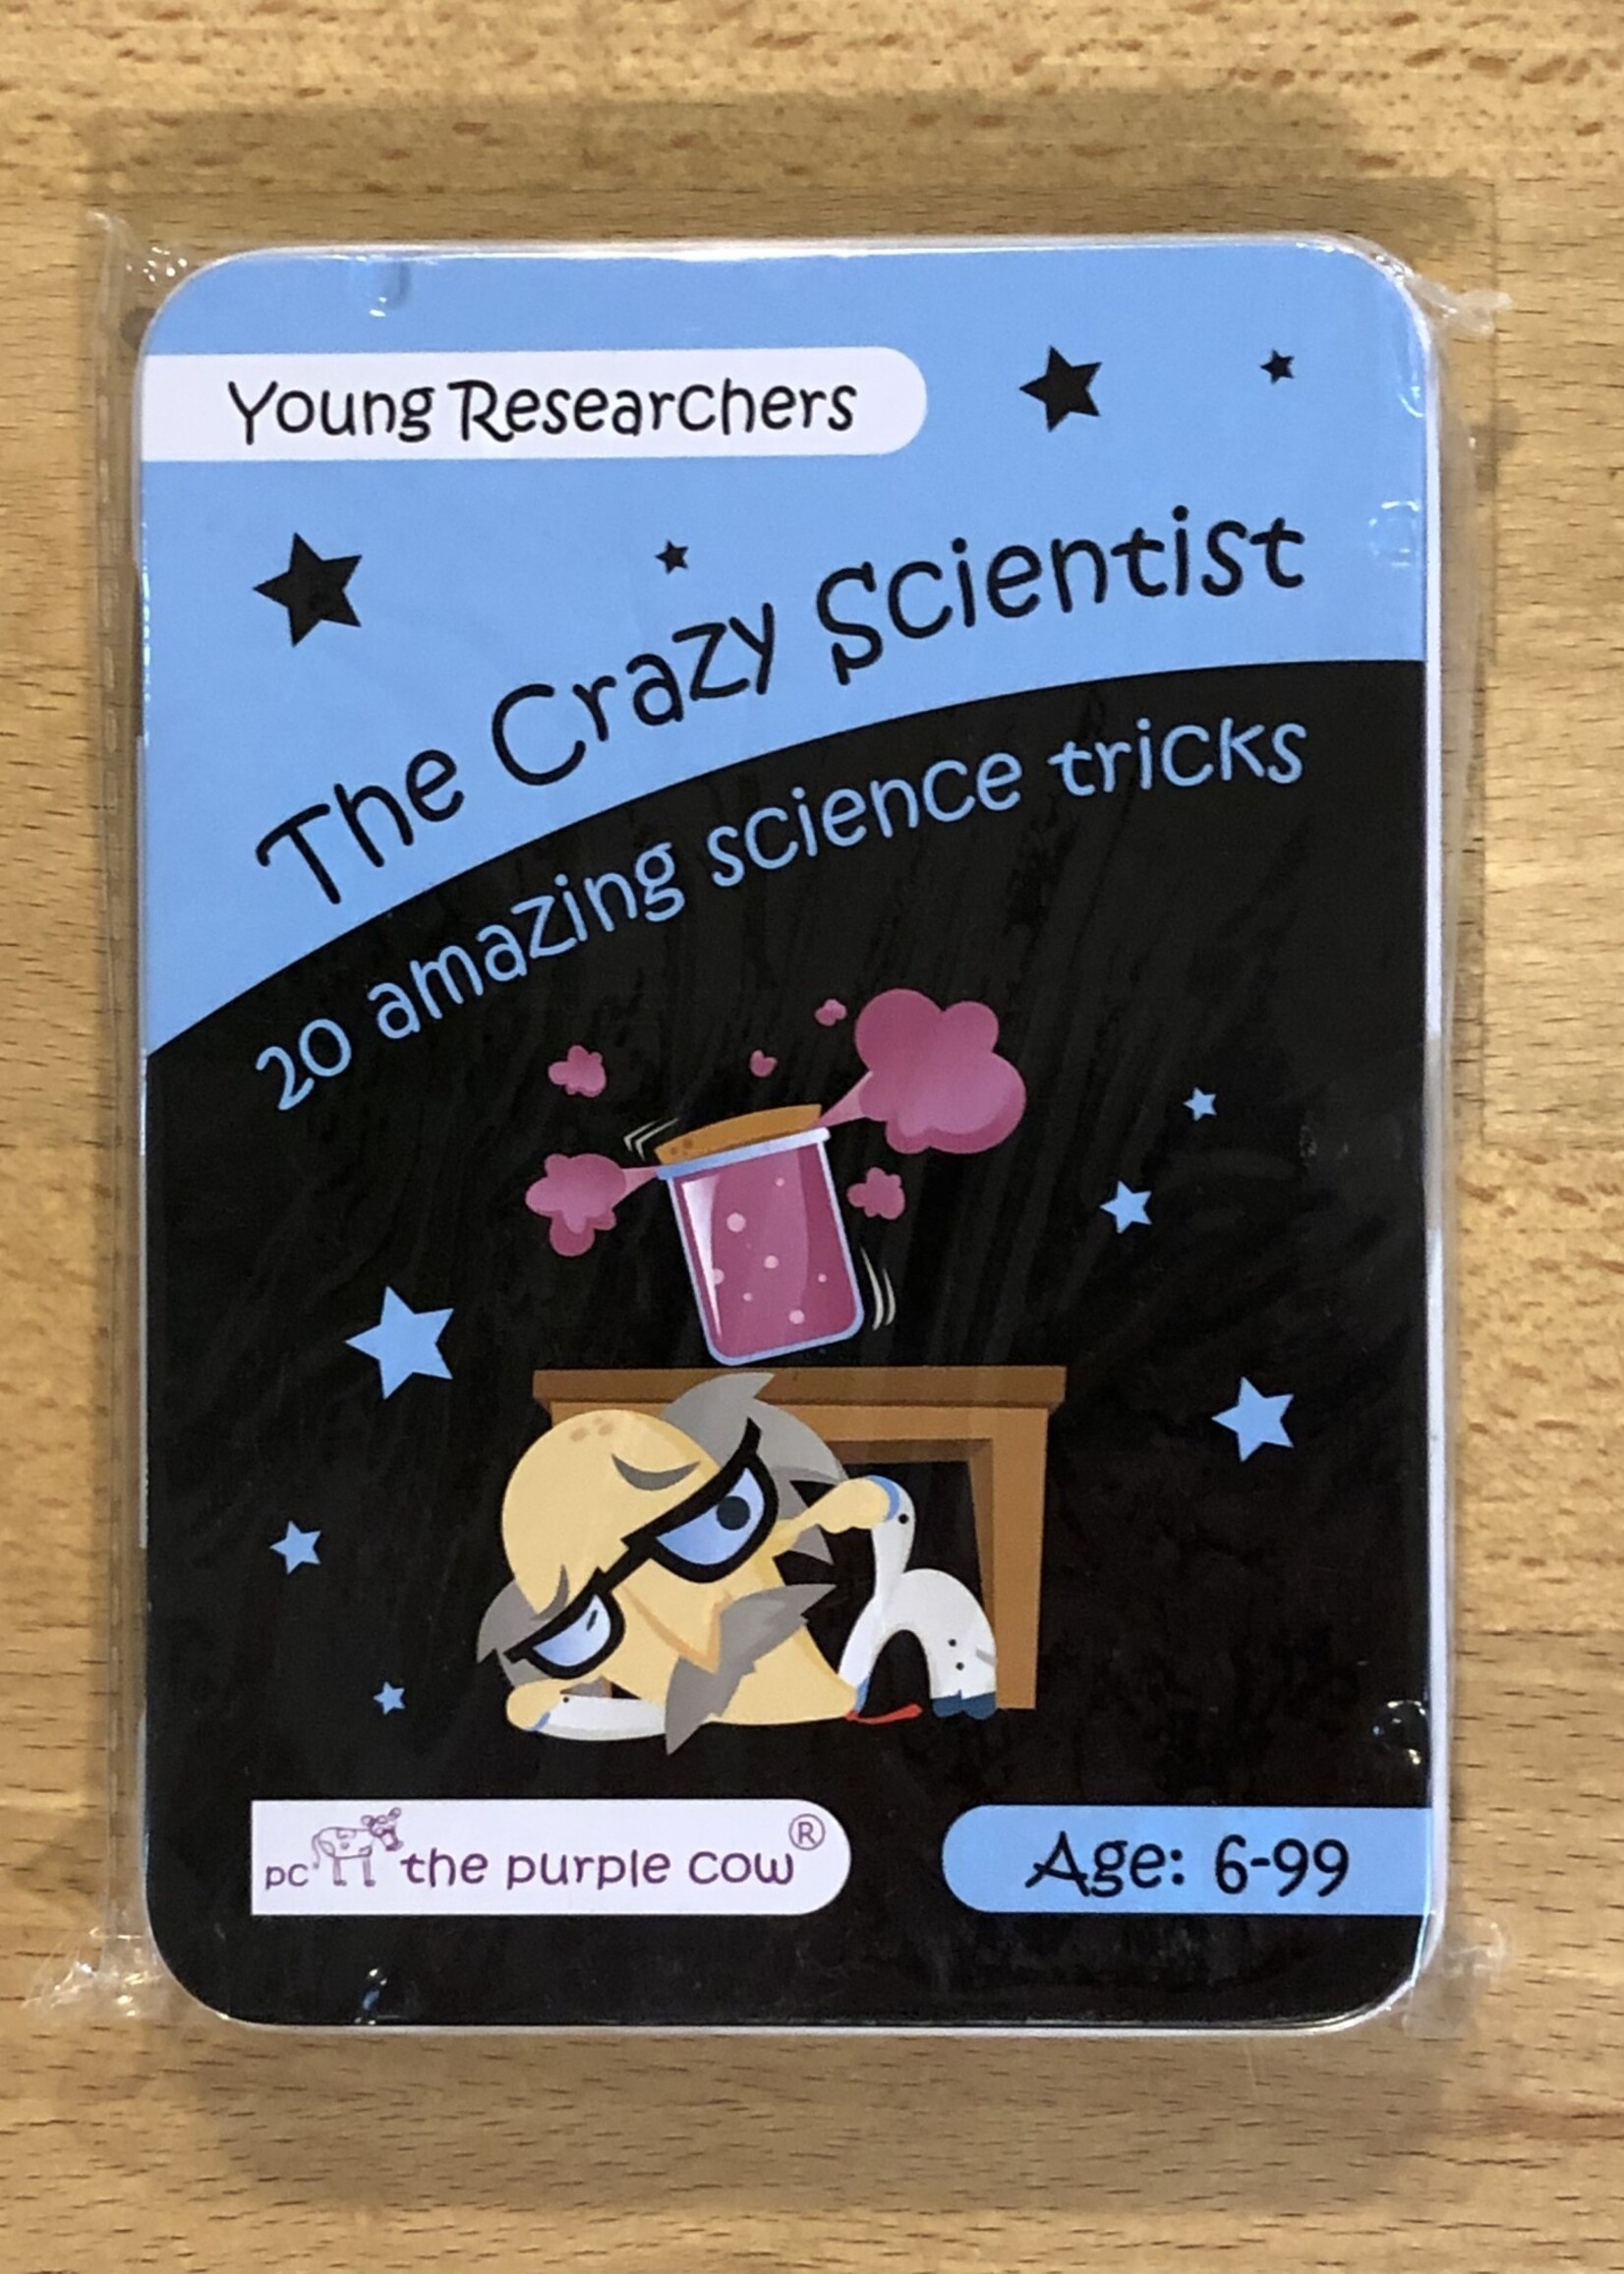 Card Game - The Crazy Scientist: Young Researchers